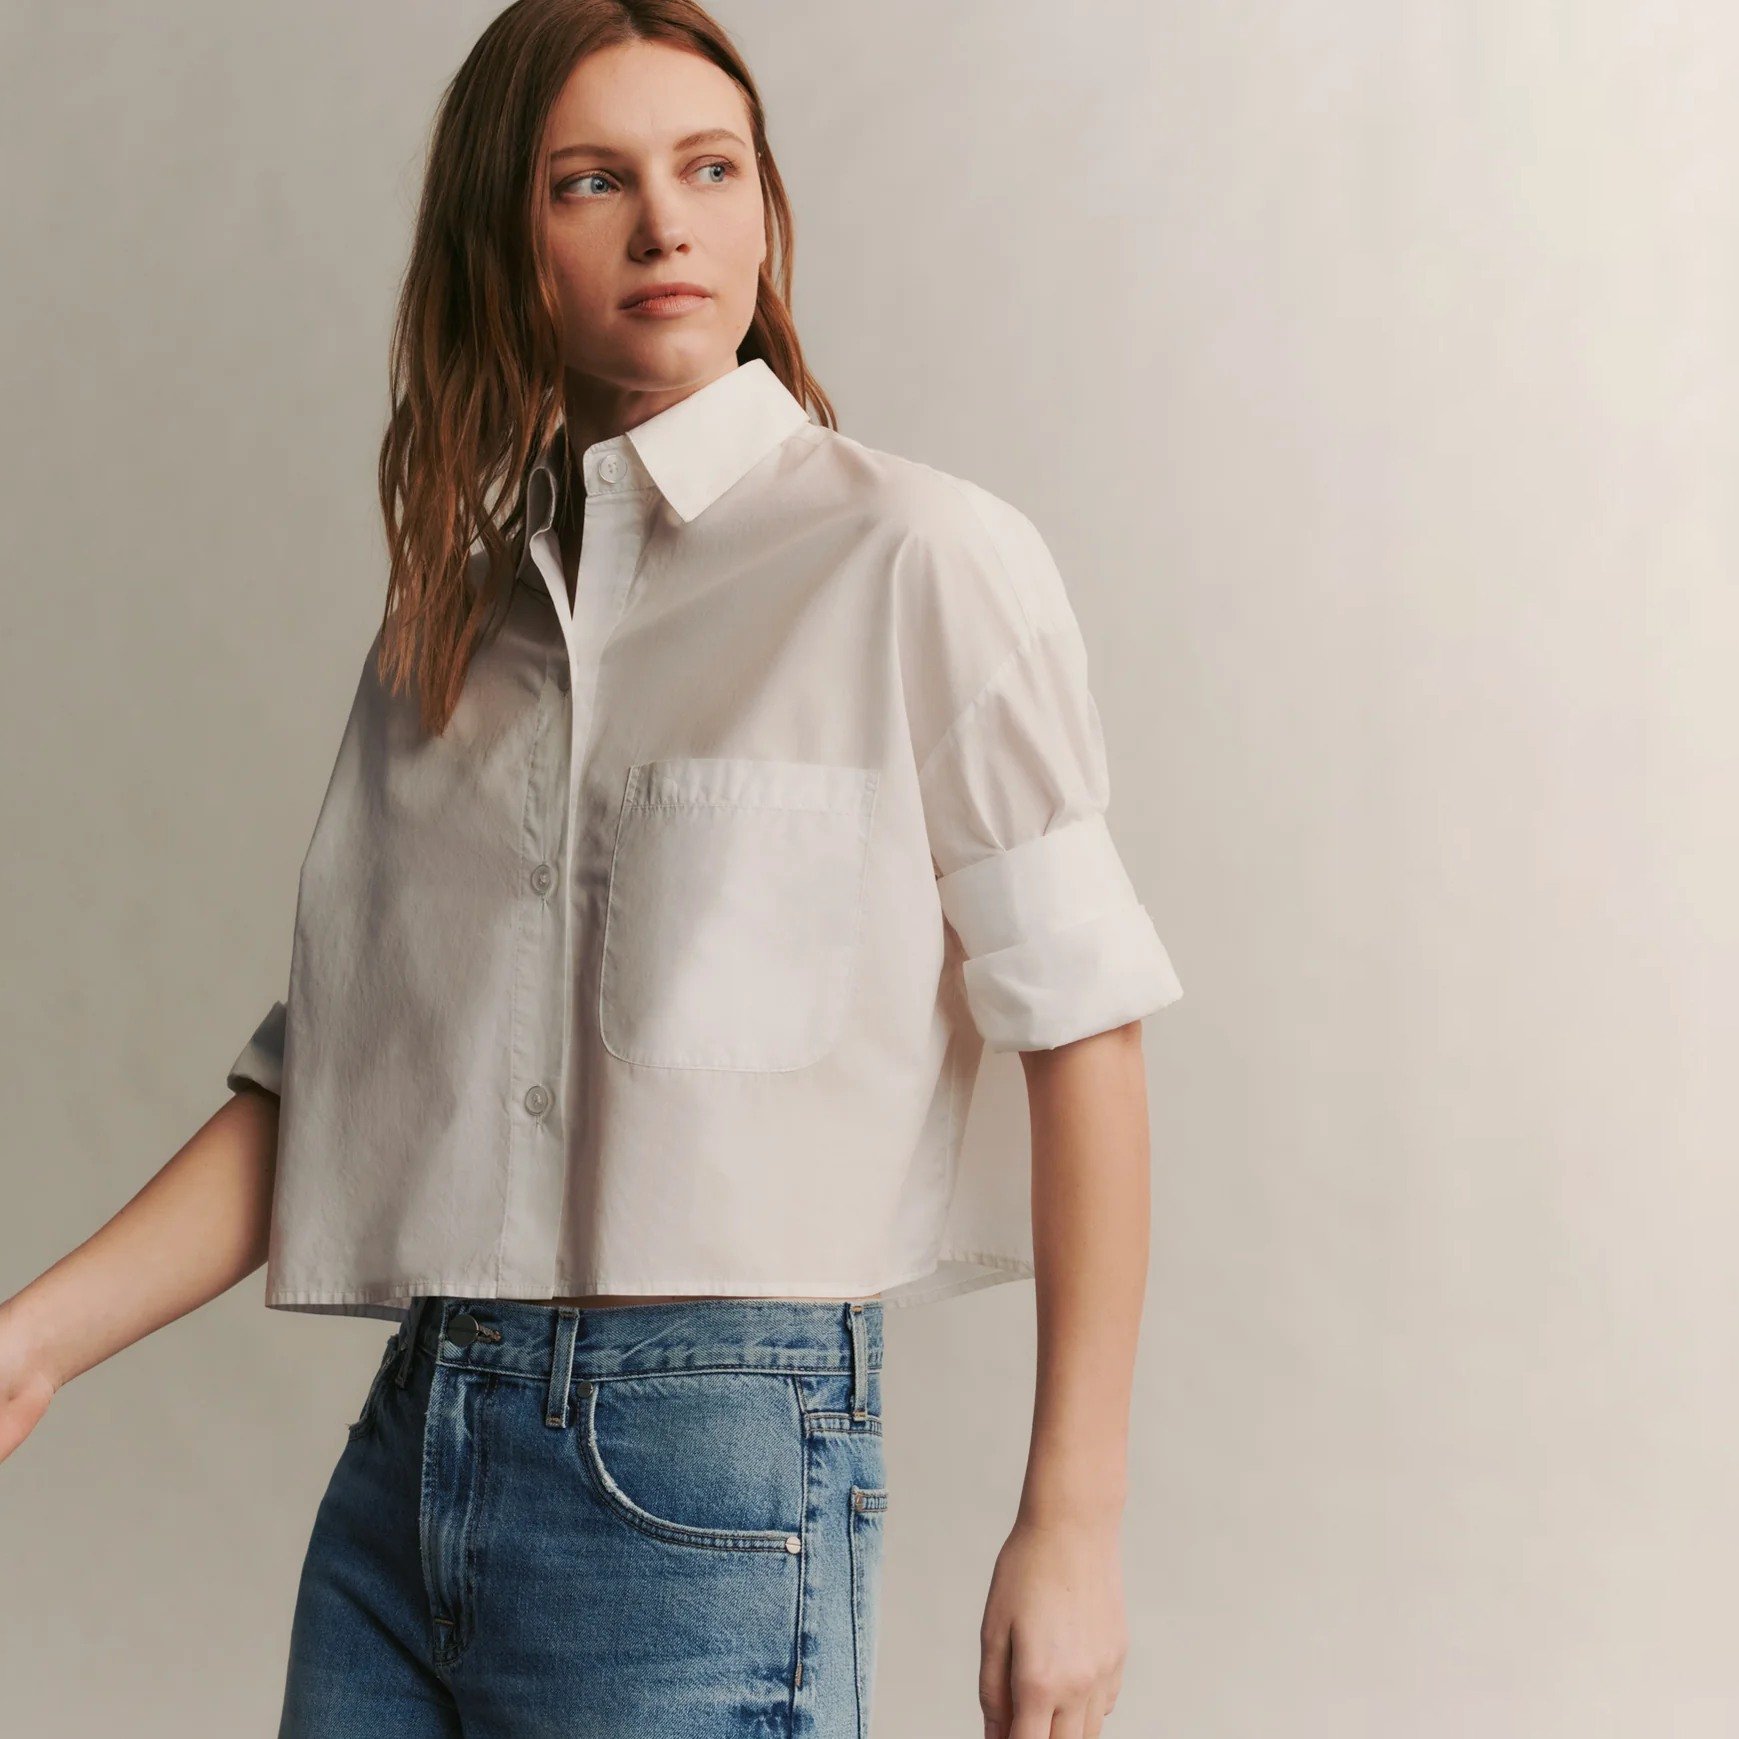 The new summer look from TWP - cropped oxfords and wide leg jeans make a cool statement while temperatures are rising. Shop the newly-delivered line in-store today 'til 5:30 or online anytime at the link in our bio. 

#deborahkents #twp #southtampa #